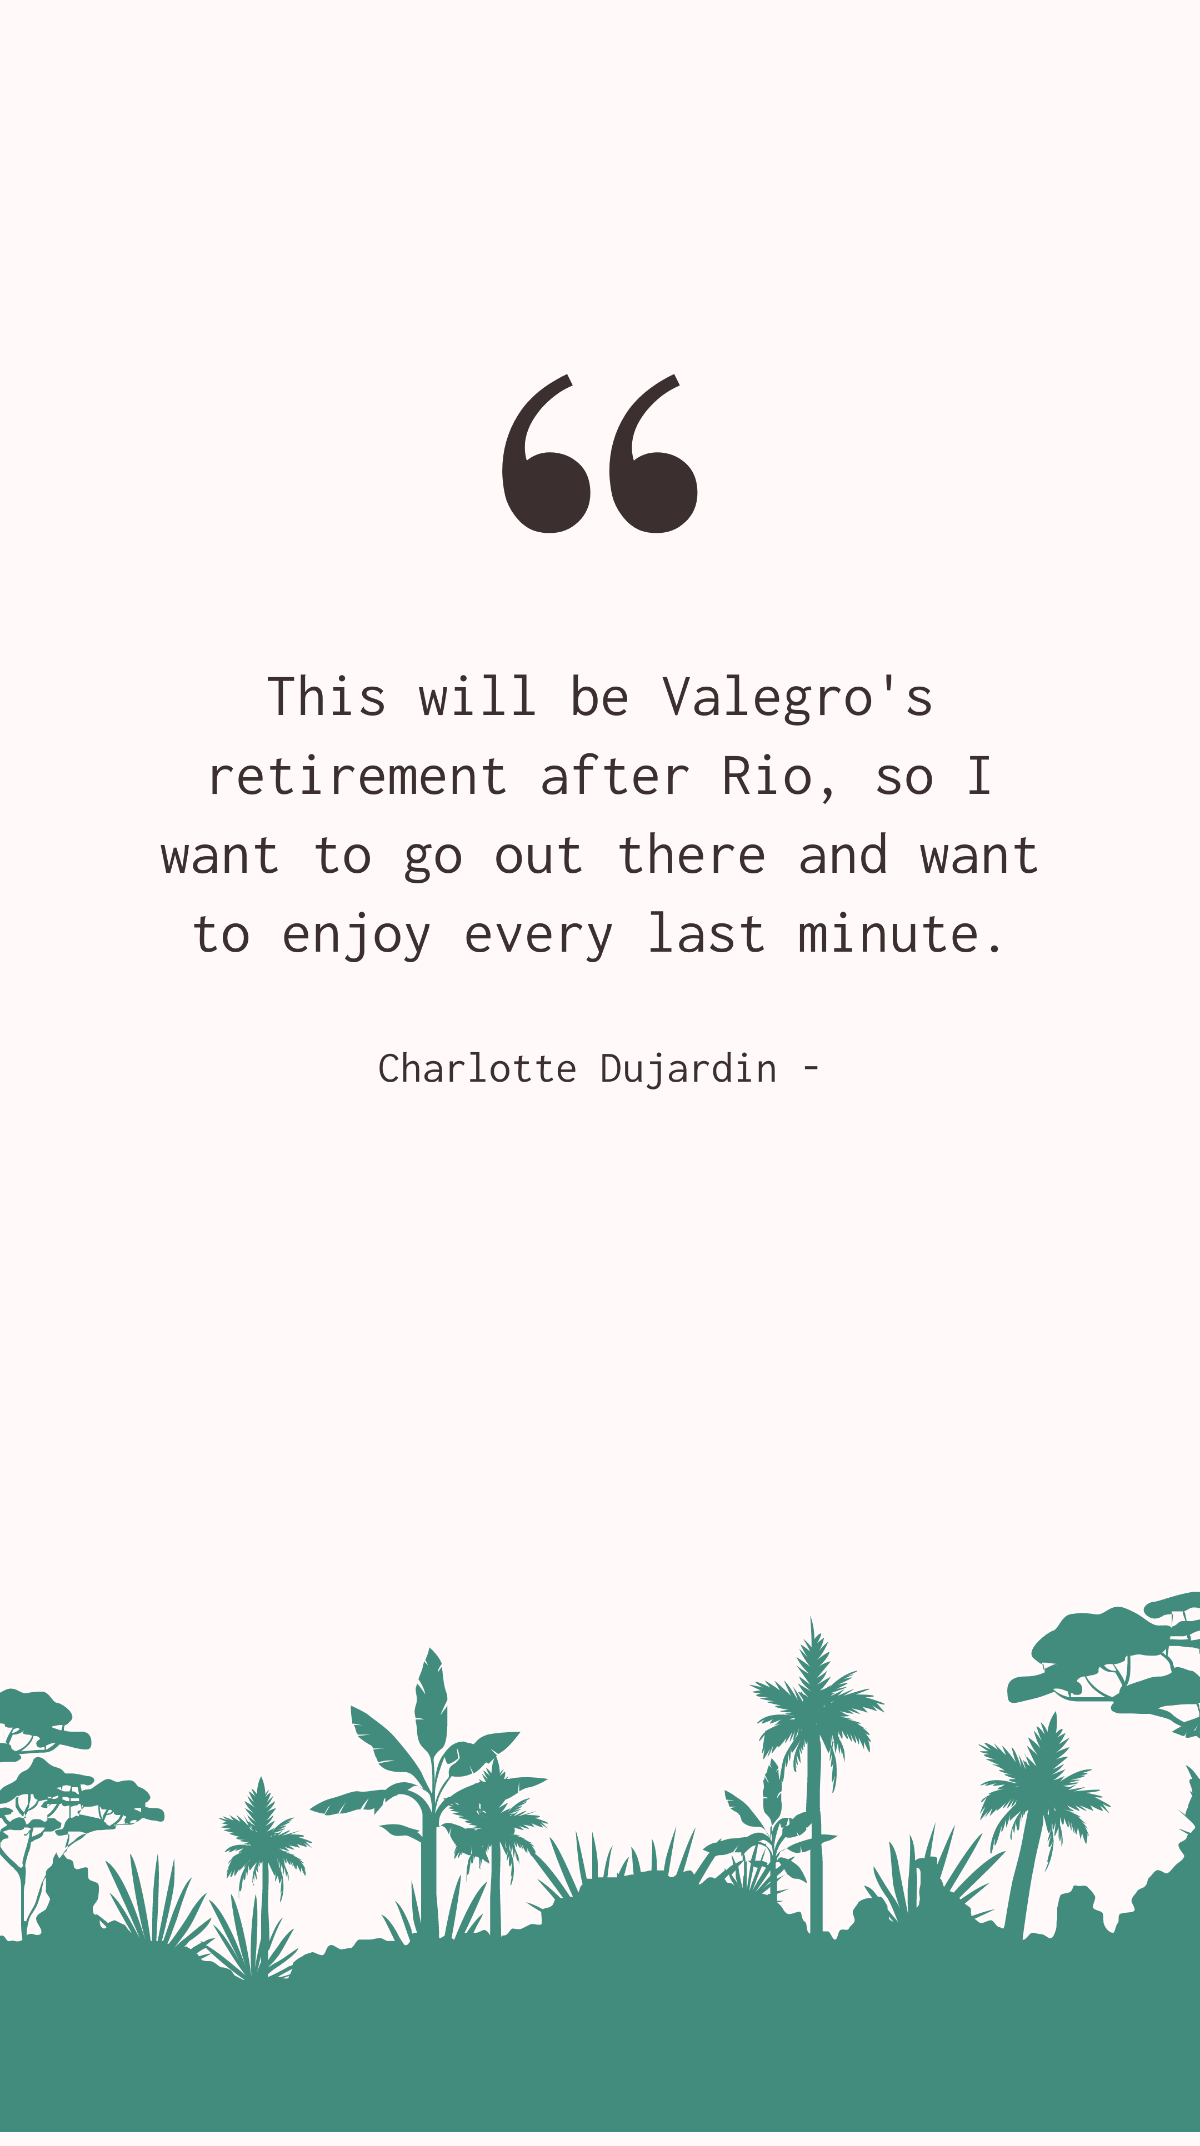 Free Charlotte Dujardin - This will be Valegro's retirement after Rio, so I want to go out there and want to enjoy every last minute. Template